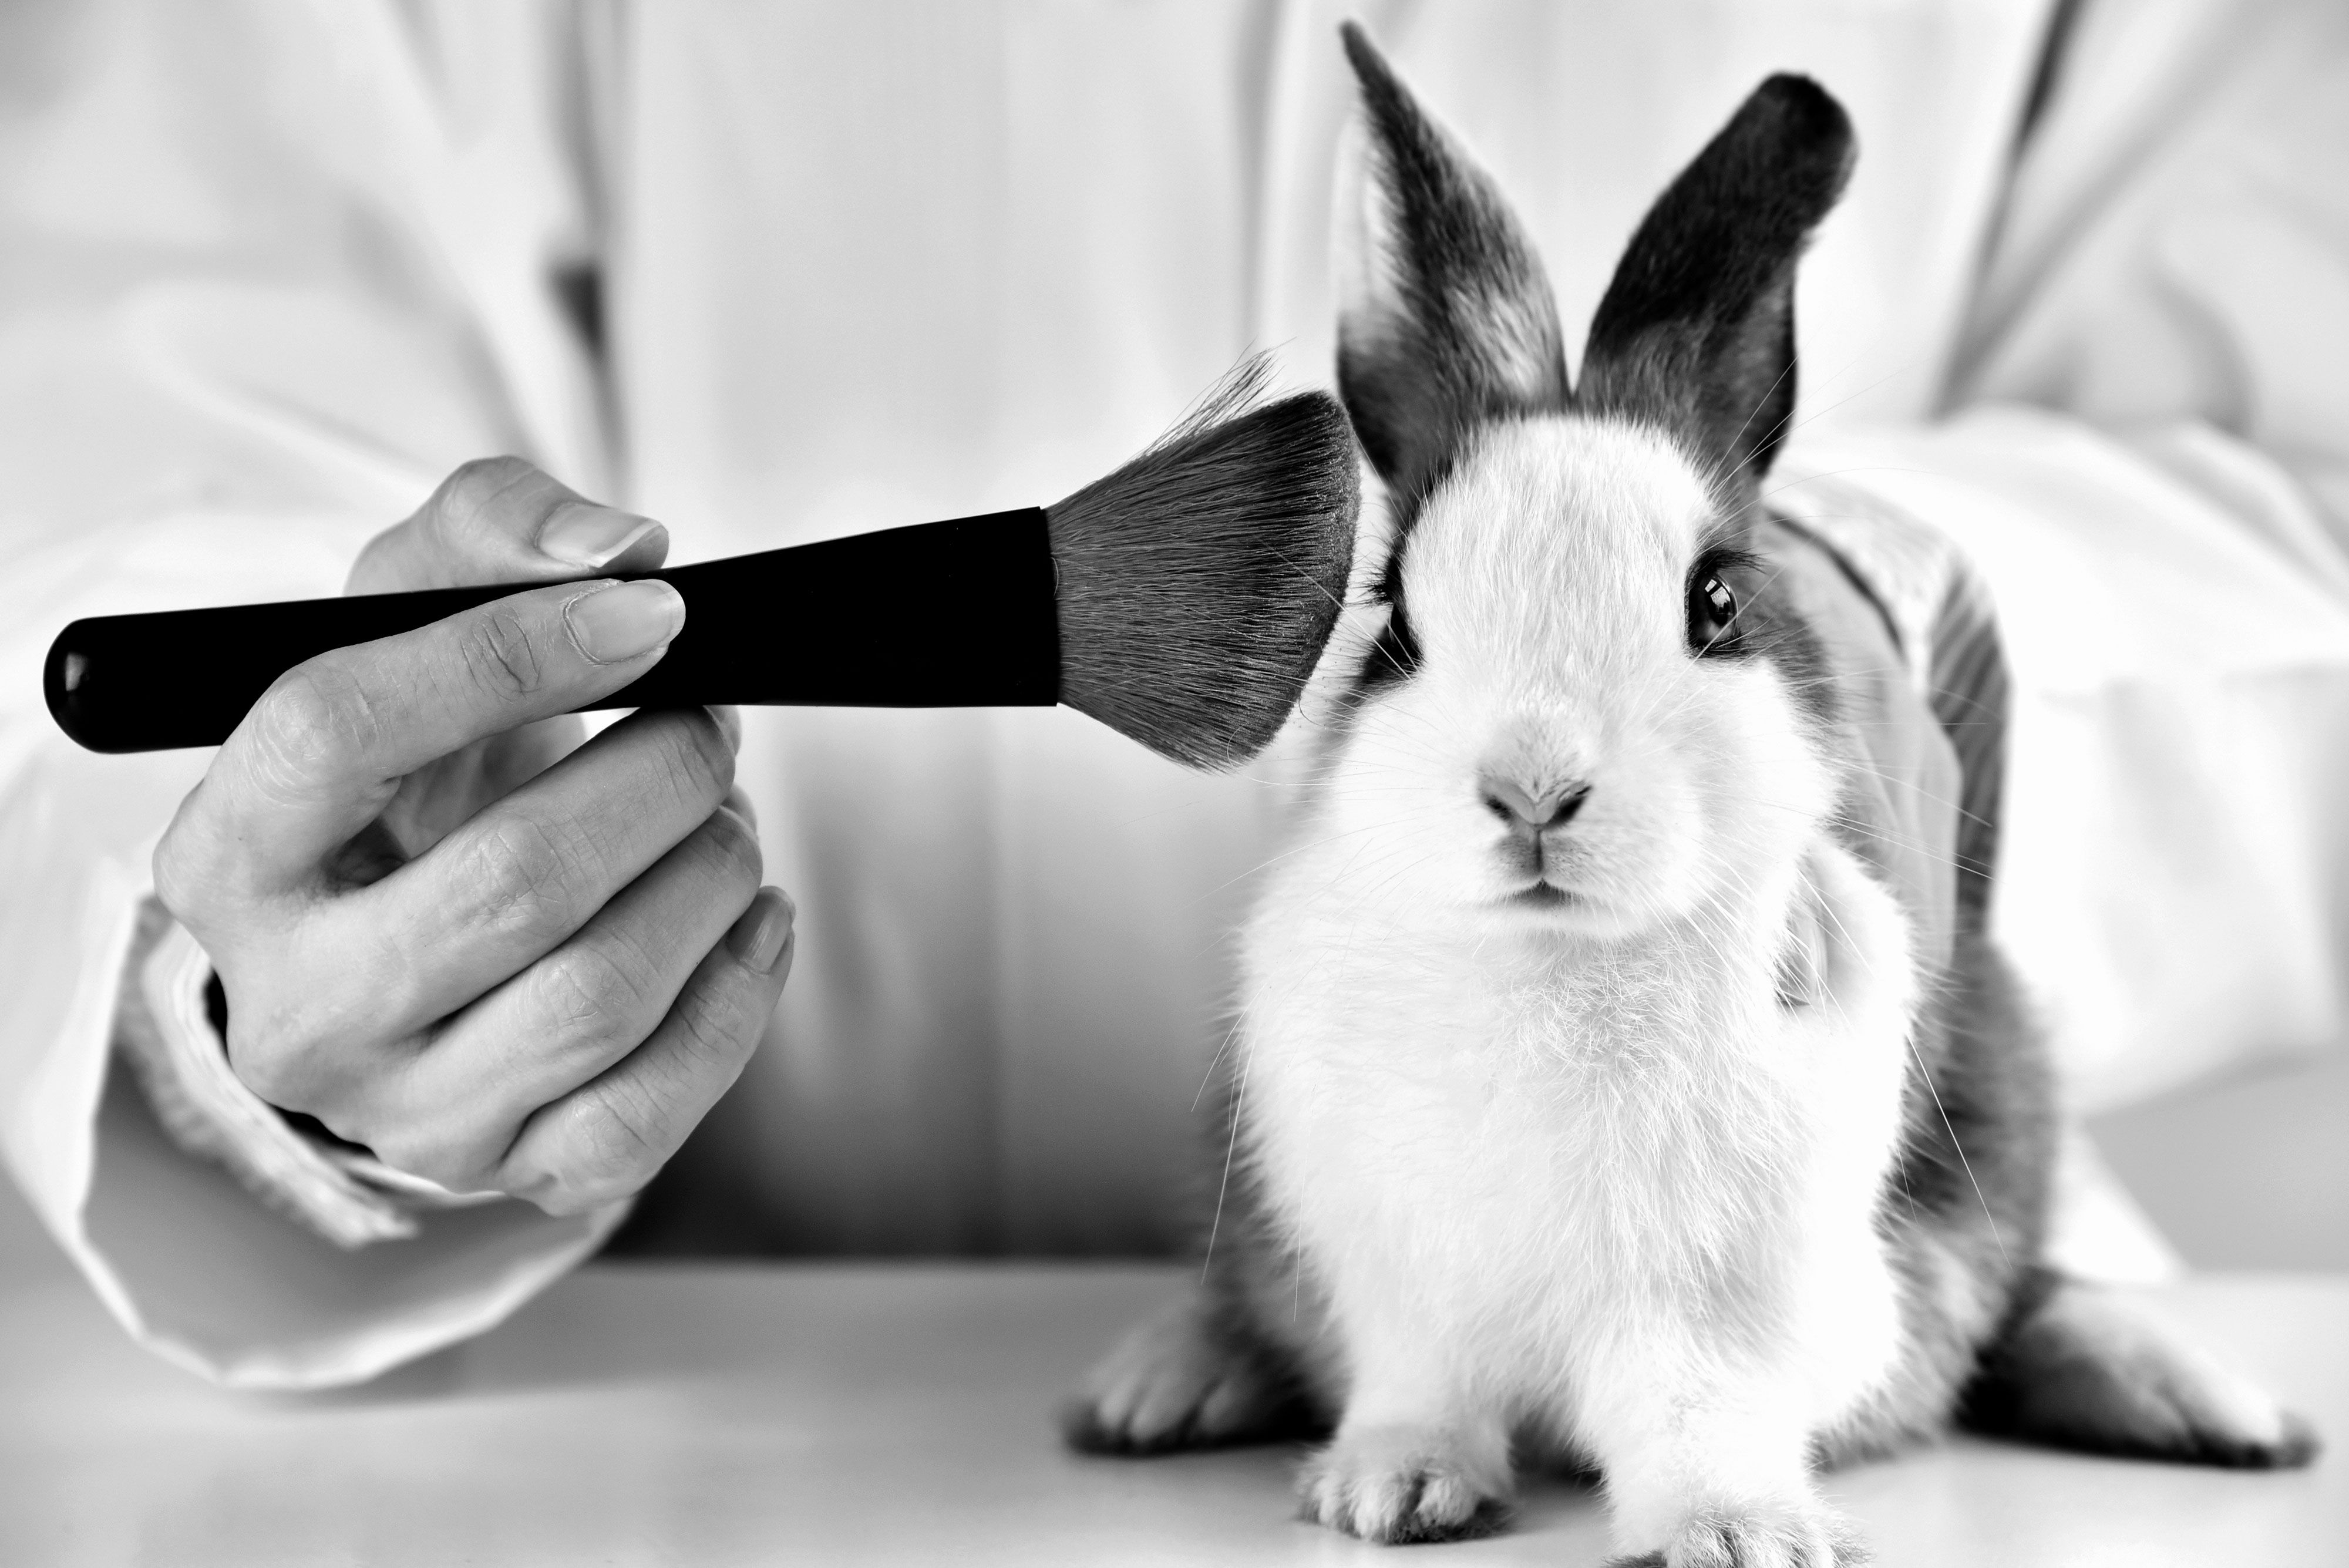 Cosmetic Animal Testing Is Now Banned In These Three States